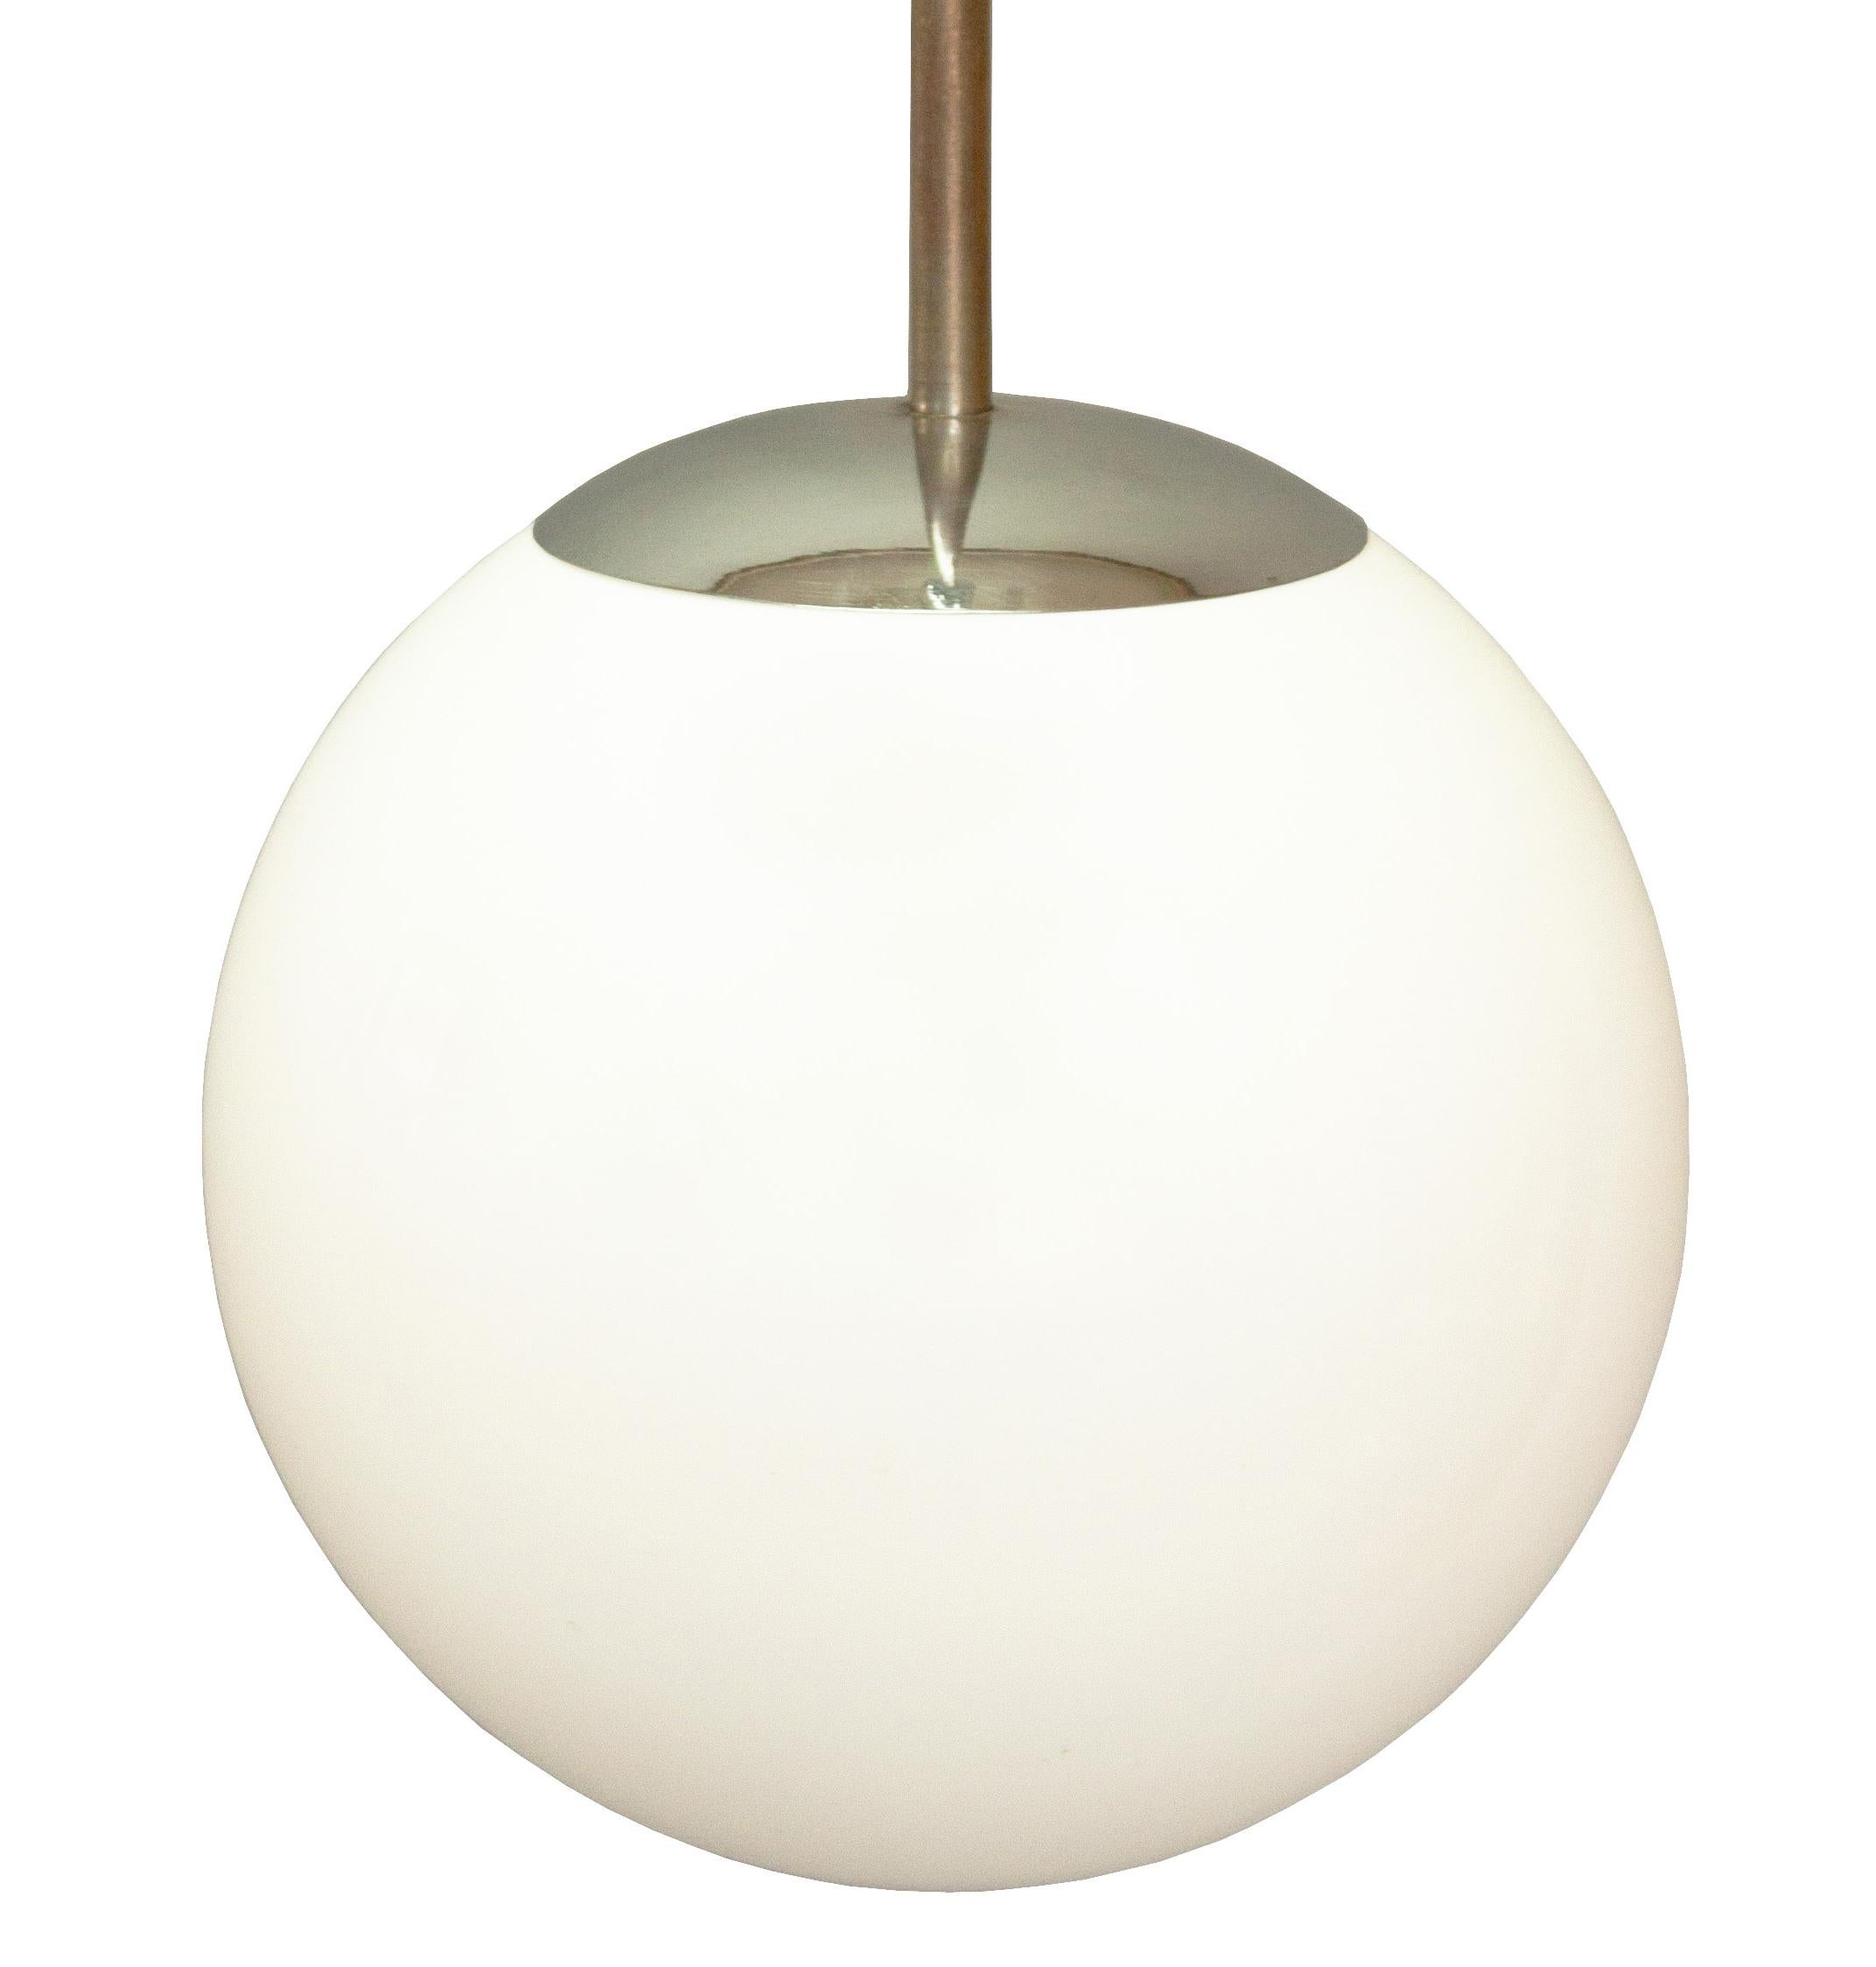 A great example of a modernist ceiling mounted pendant designed in Czechoslovakia in the 1930s. The simplicity of its form makes this piece timeless.